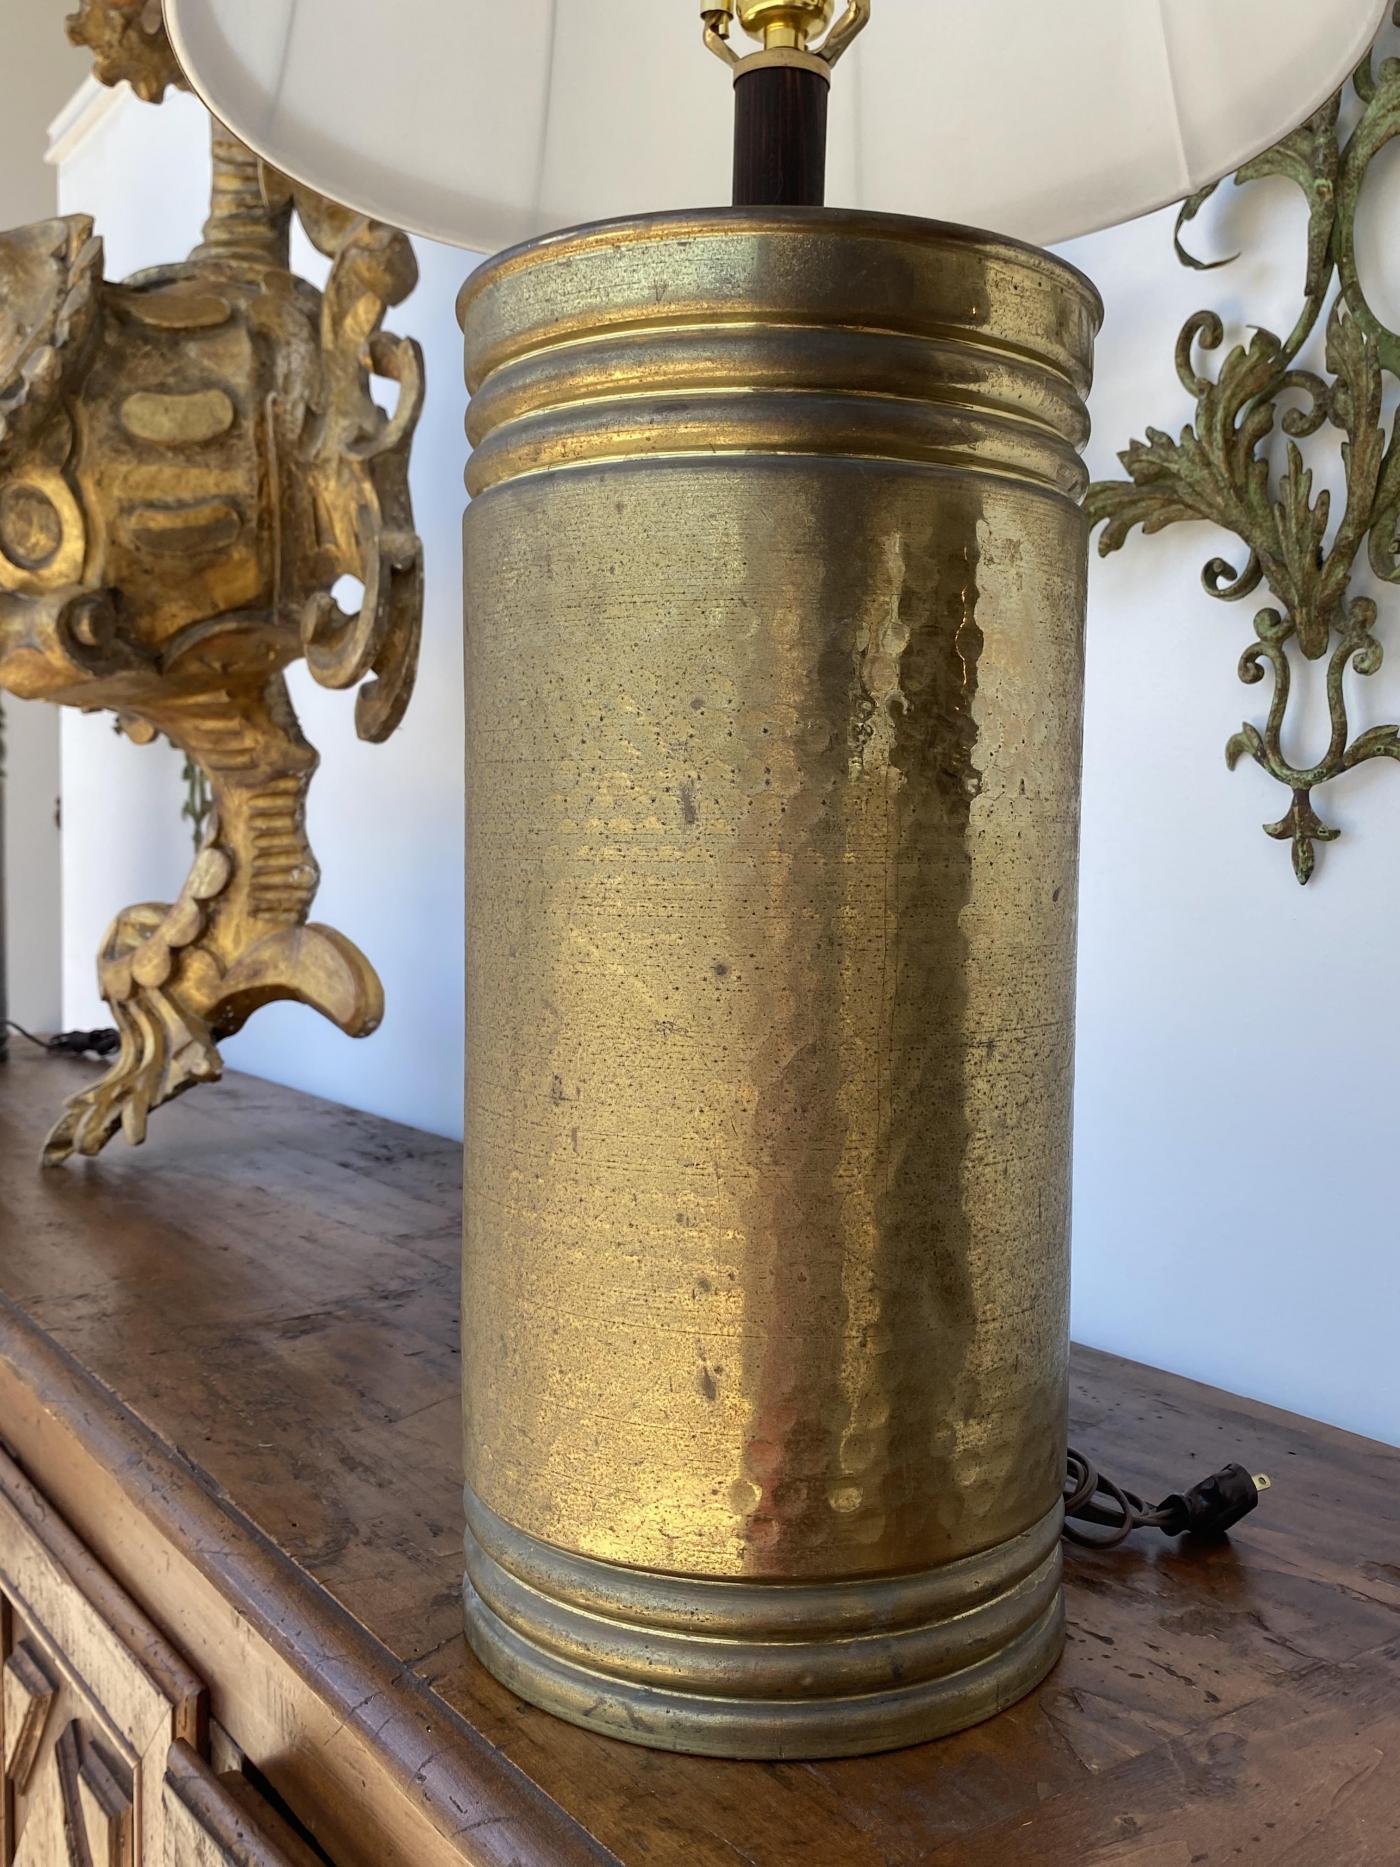 Each cylindrical hammered urn mounted as lamps.